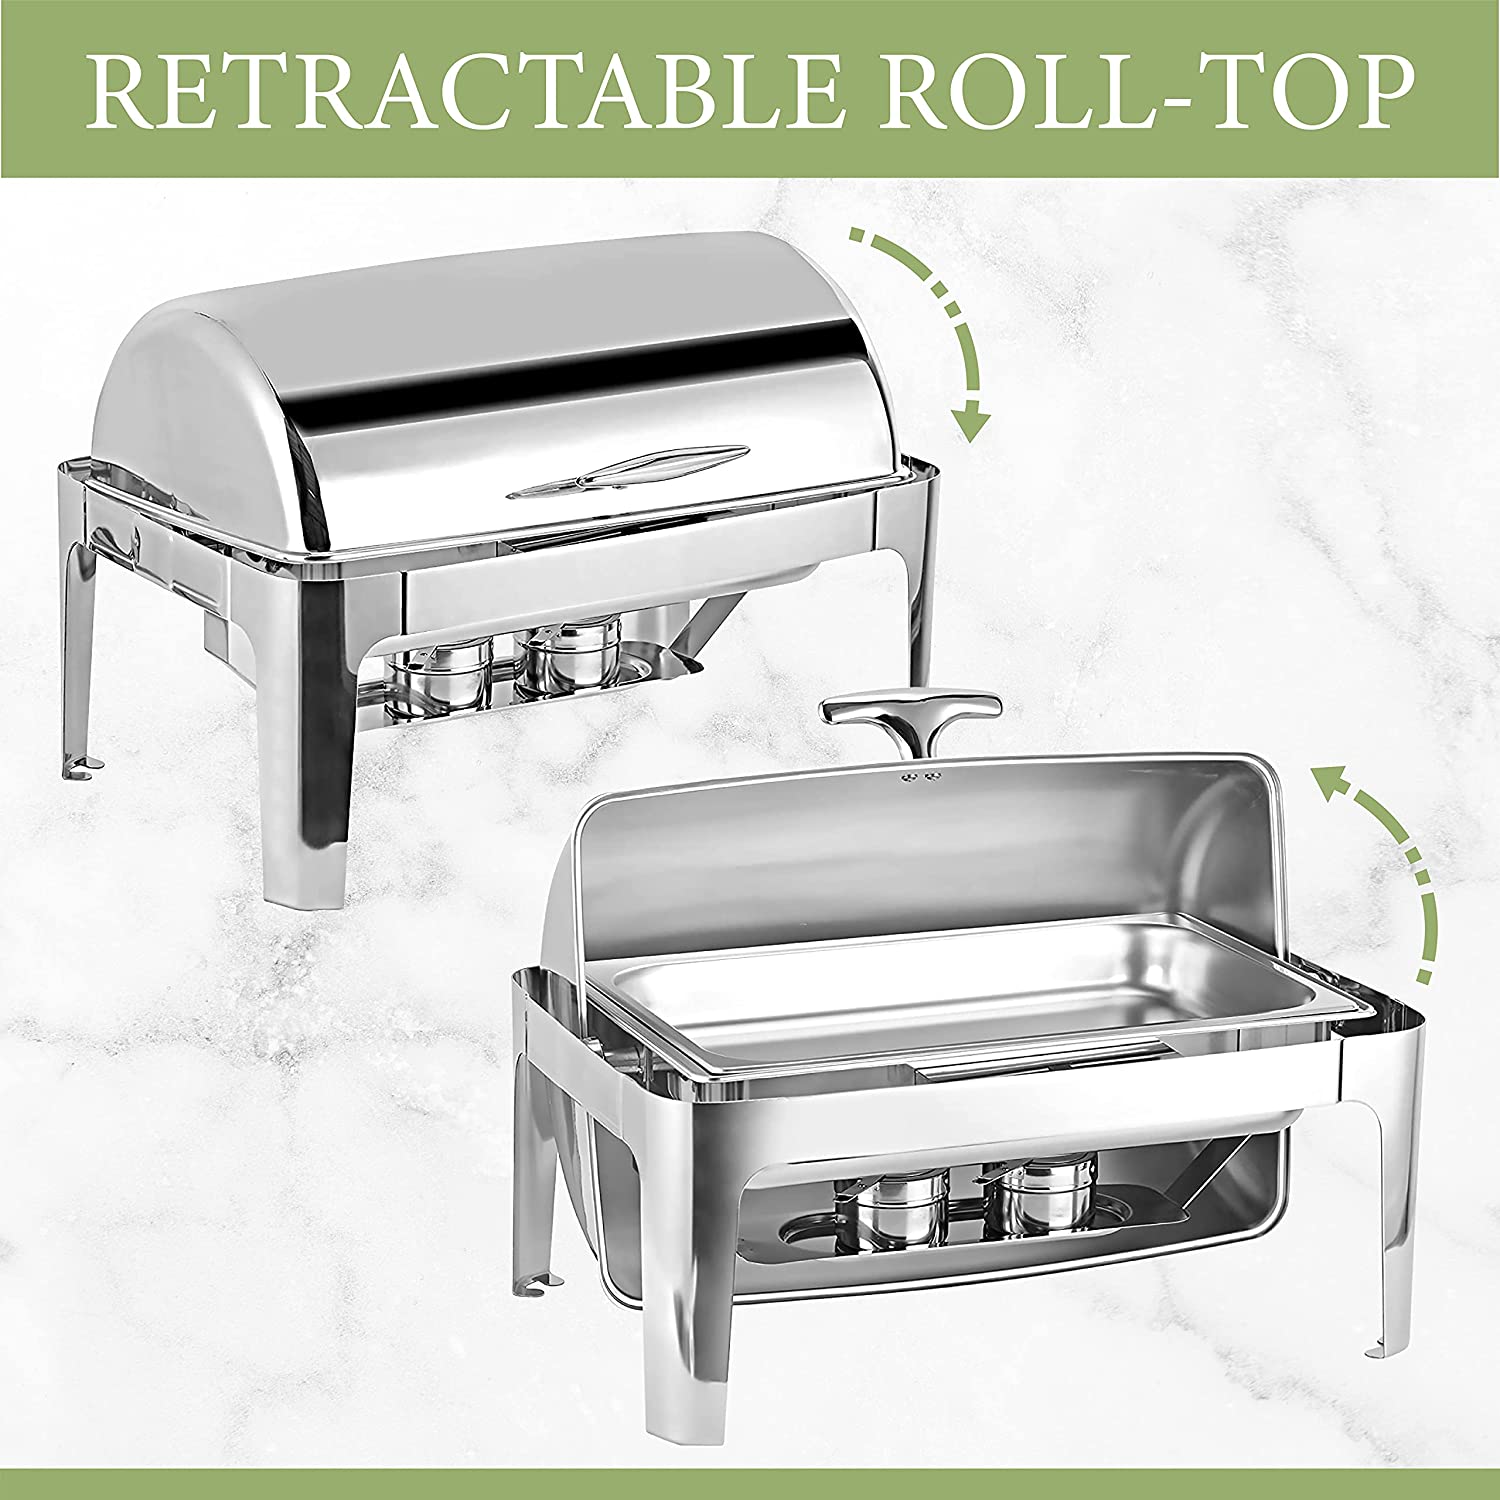 Roll Top Chafing Dish Stainless Steel  8 Quart Capacity Full-Size